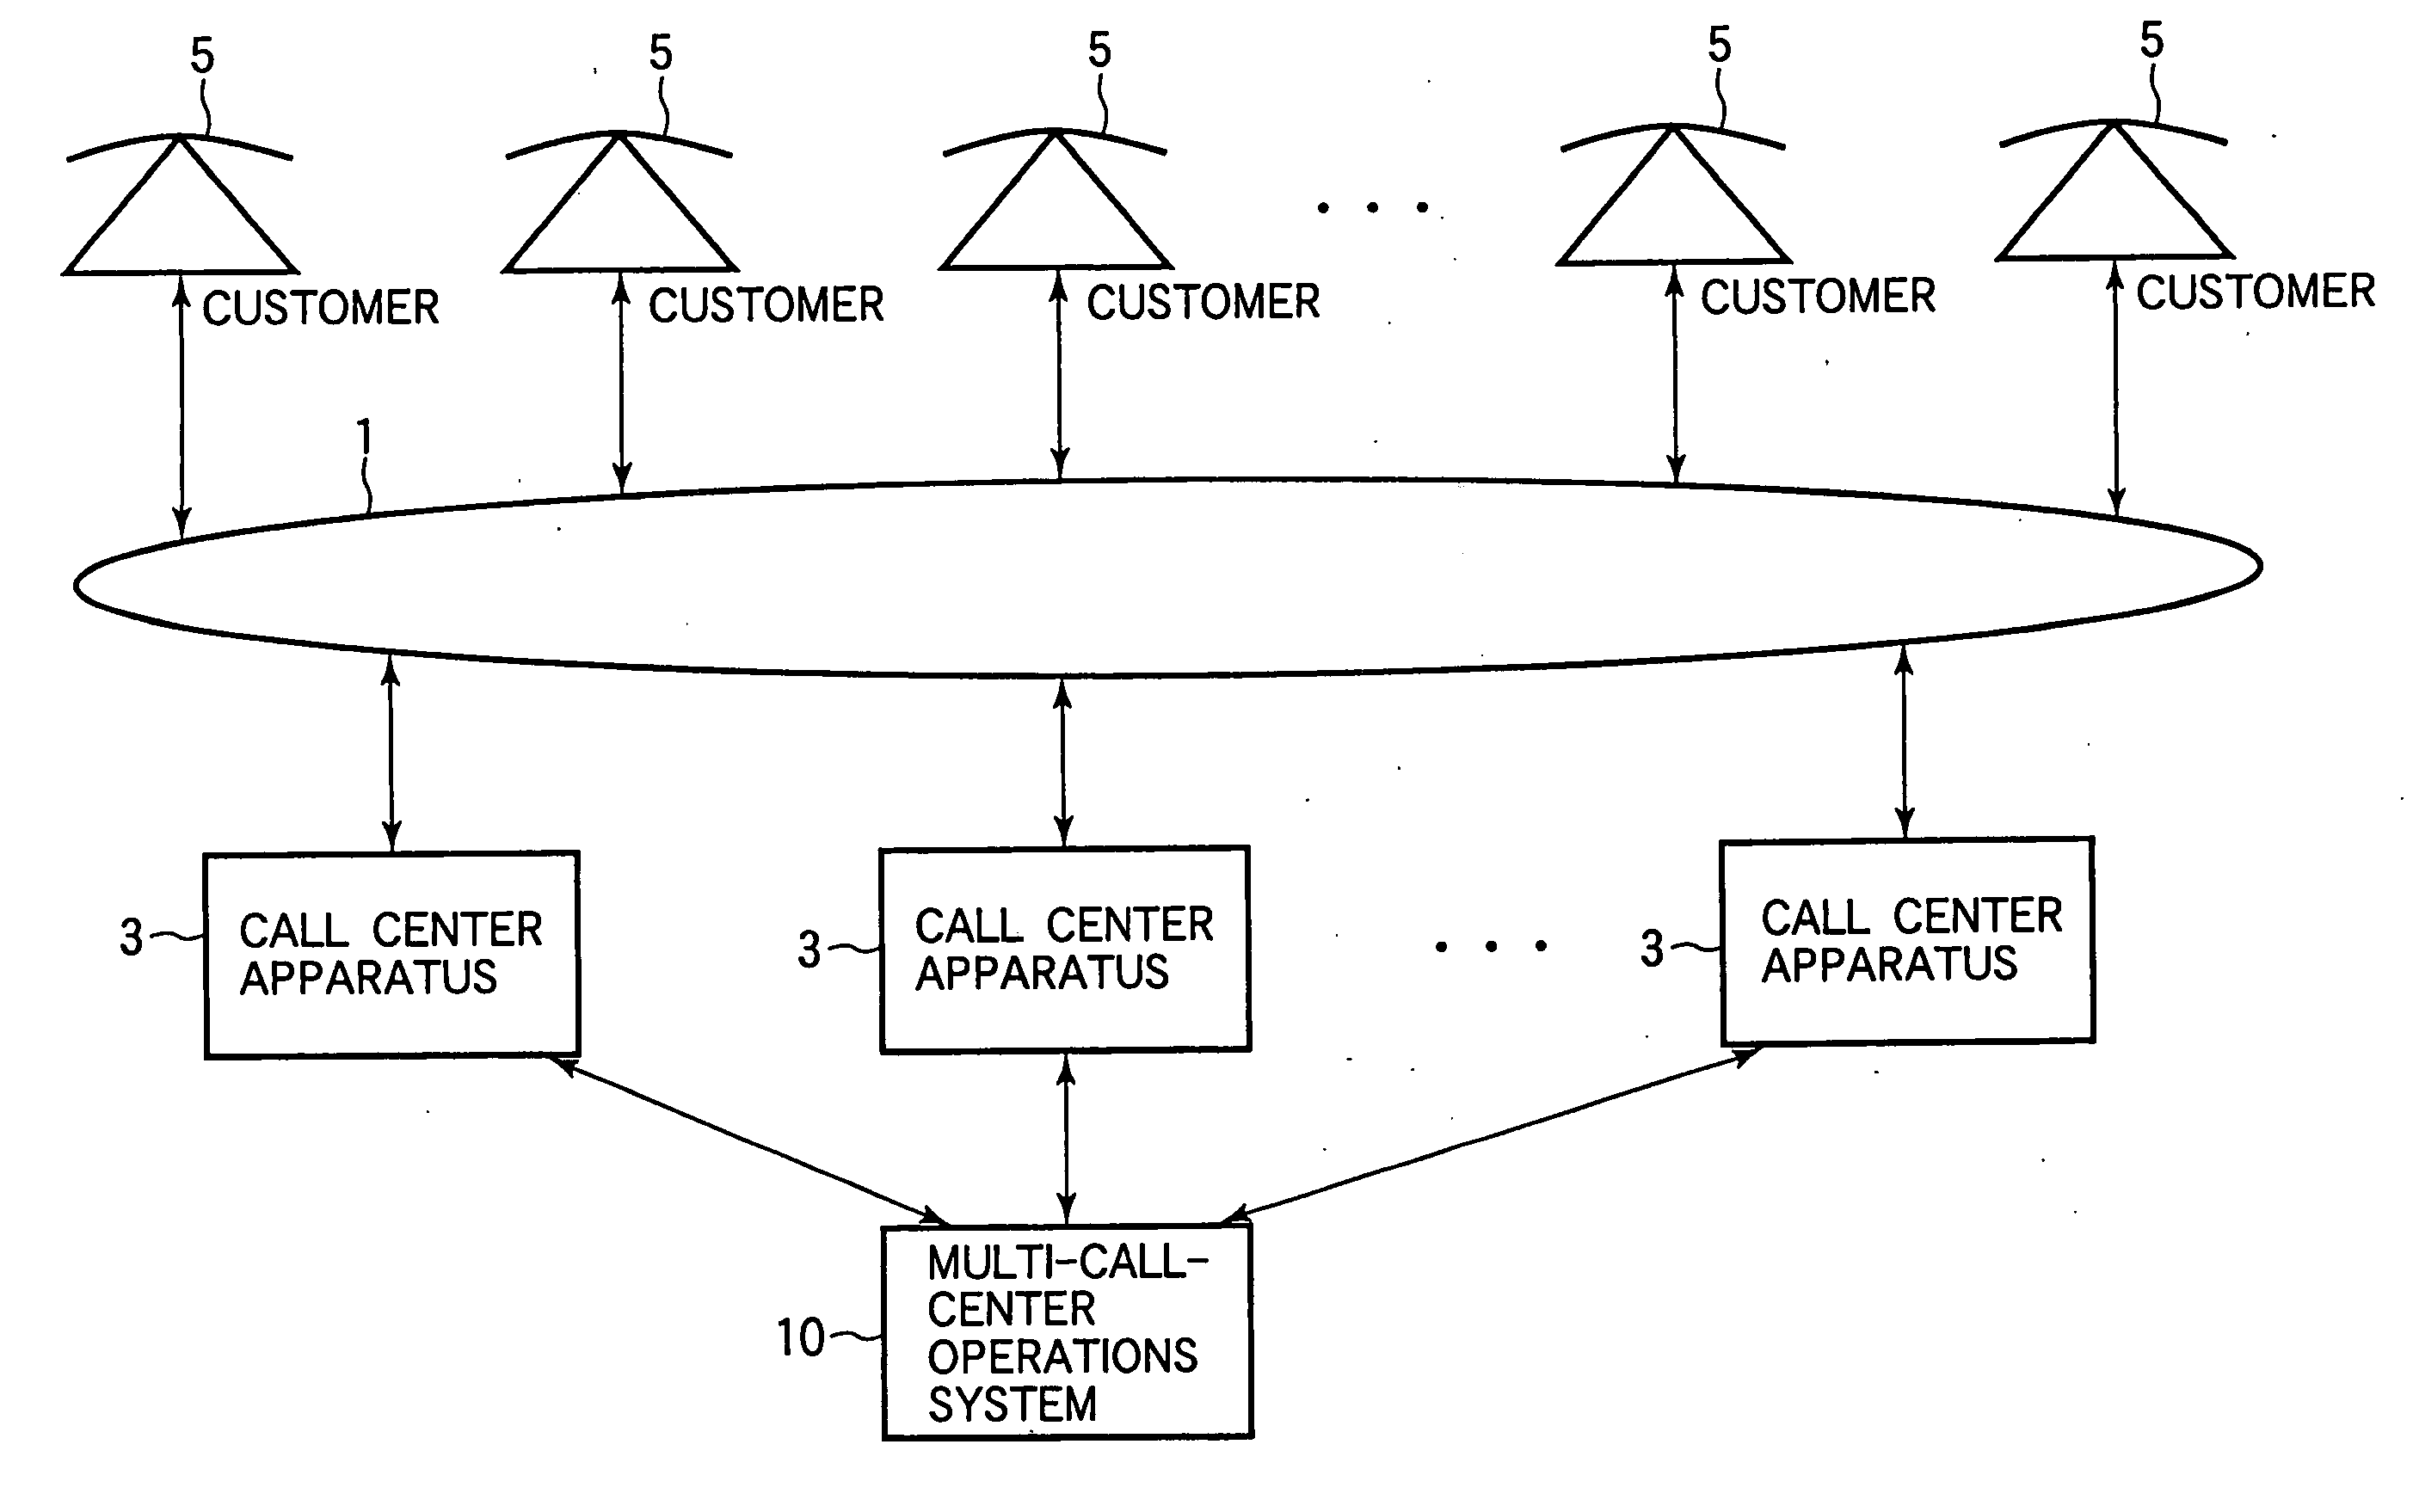 Call center operations system